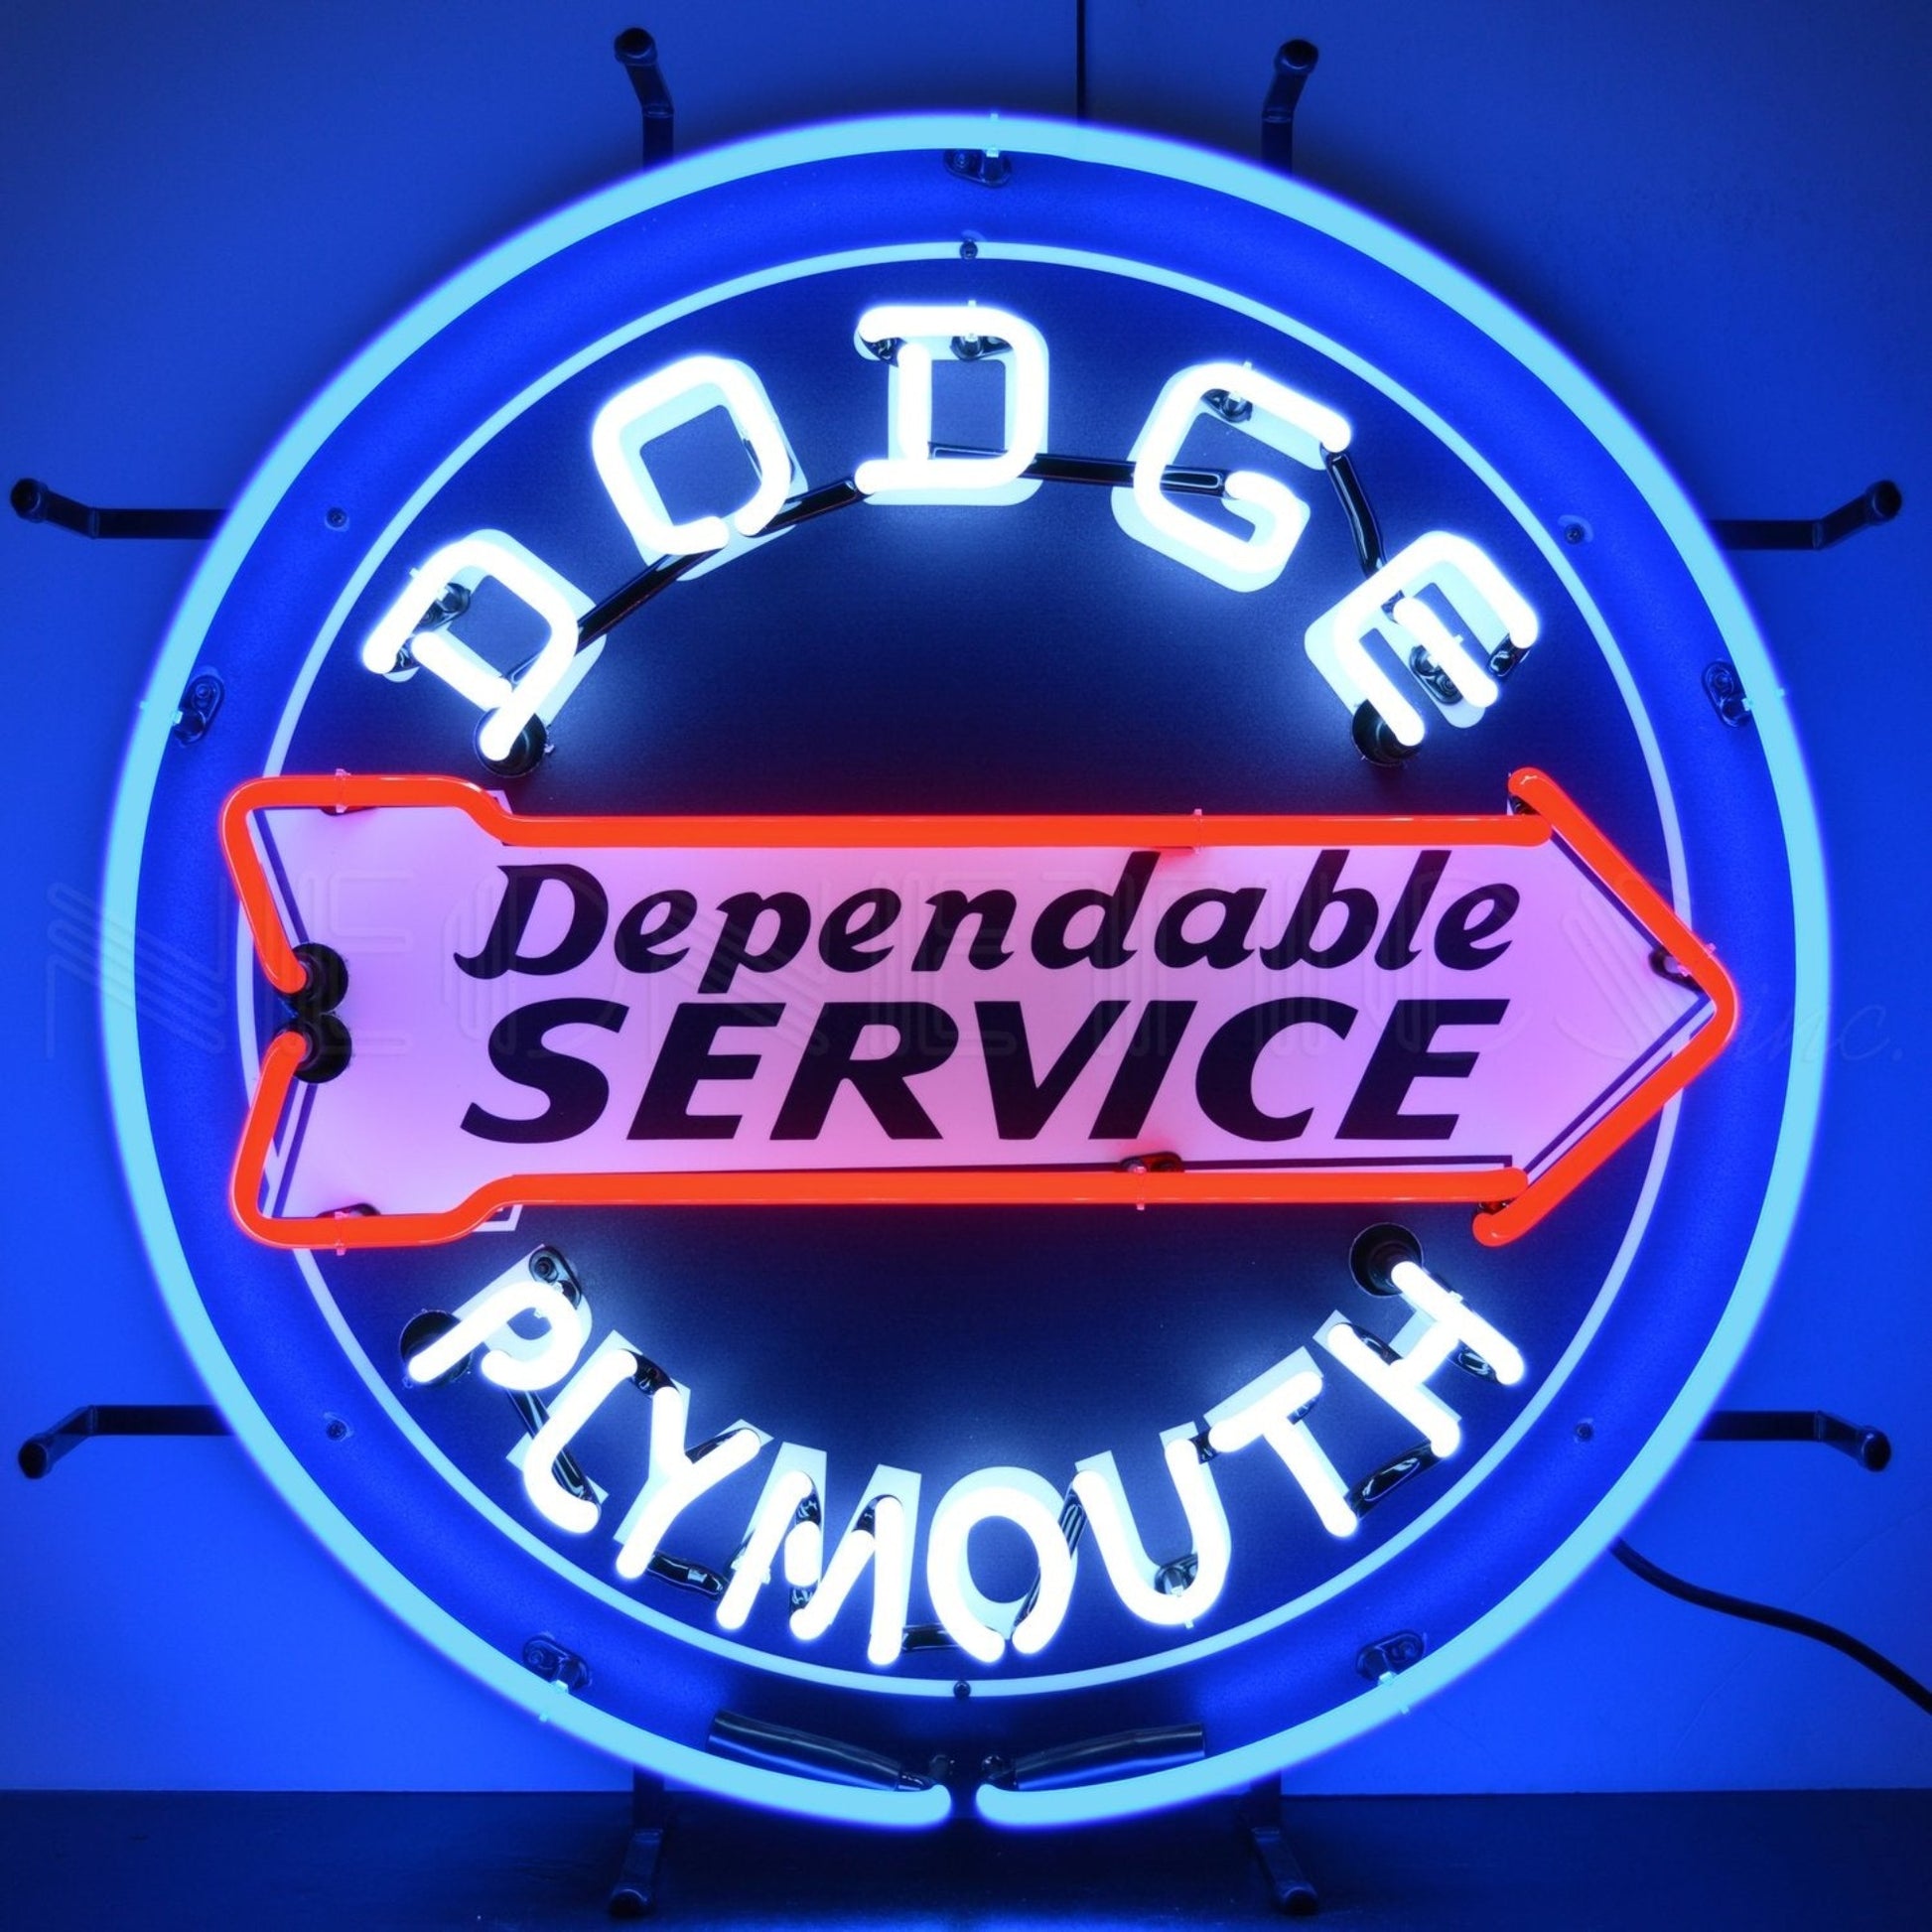 "Dodge Dependable Service" neon sign with blue and red colors.